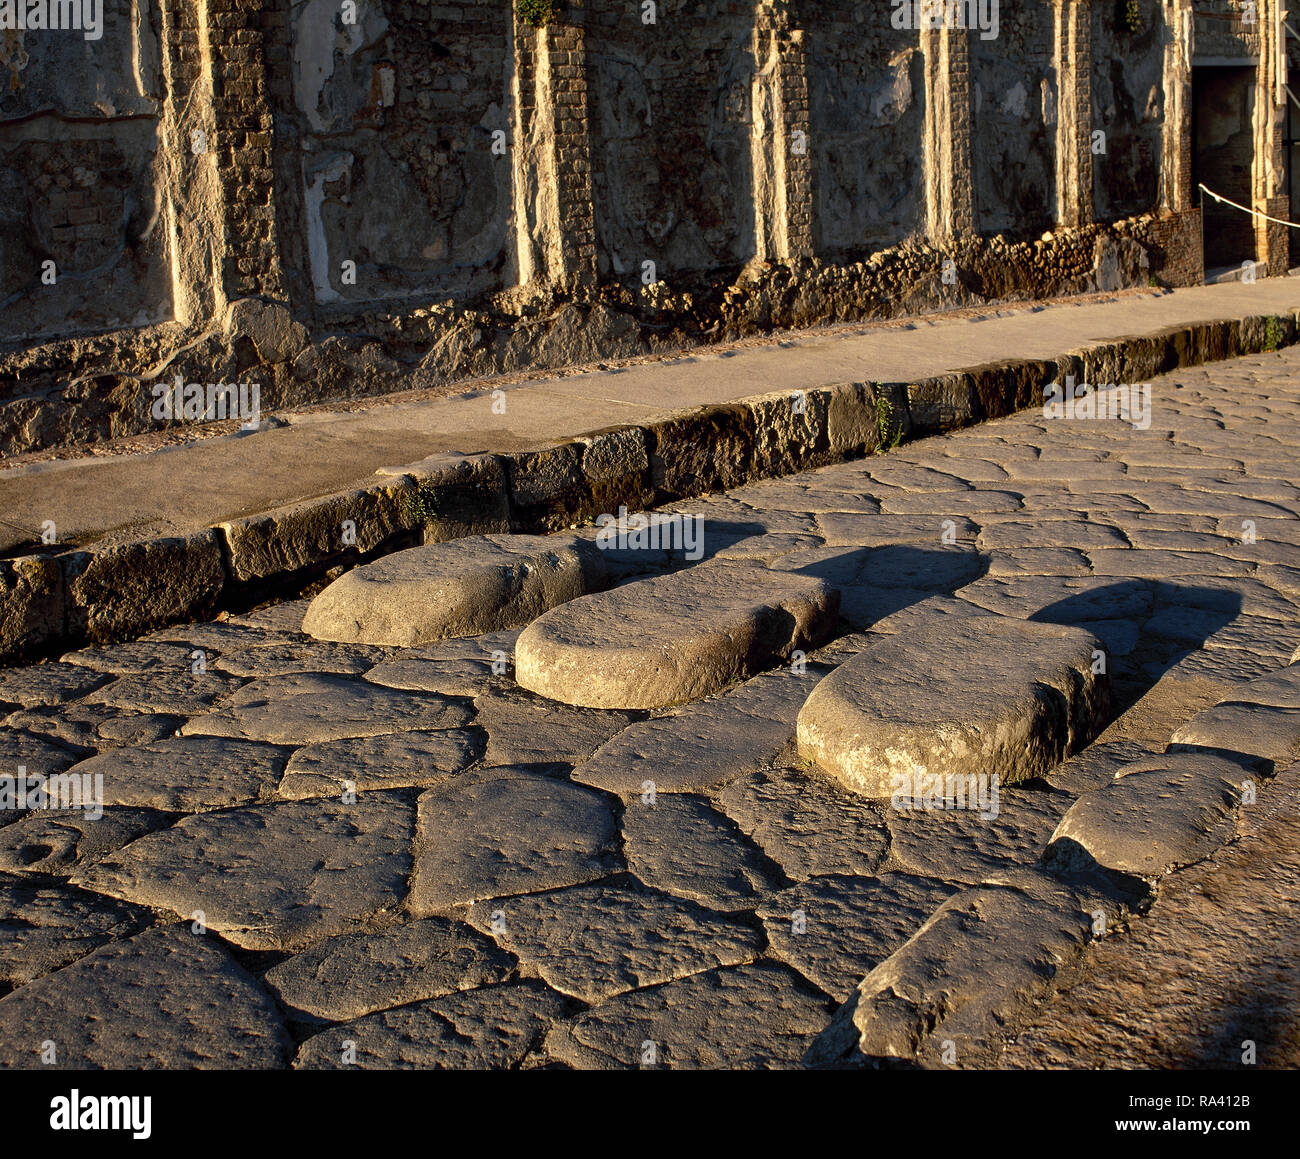 Italy. Pompeii. Pedestrian crossing at Via della Fortuna. Stepping stones for pedestrians to cross the streets without dirtyng their feet. Pompeii had no adequate sewage or drainage system. Campania. Stock Photo